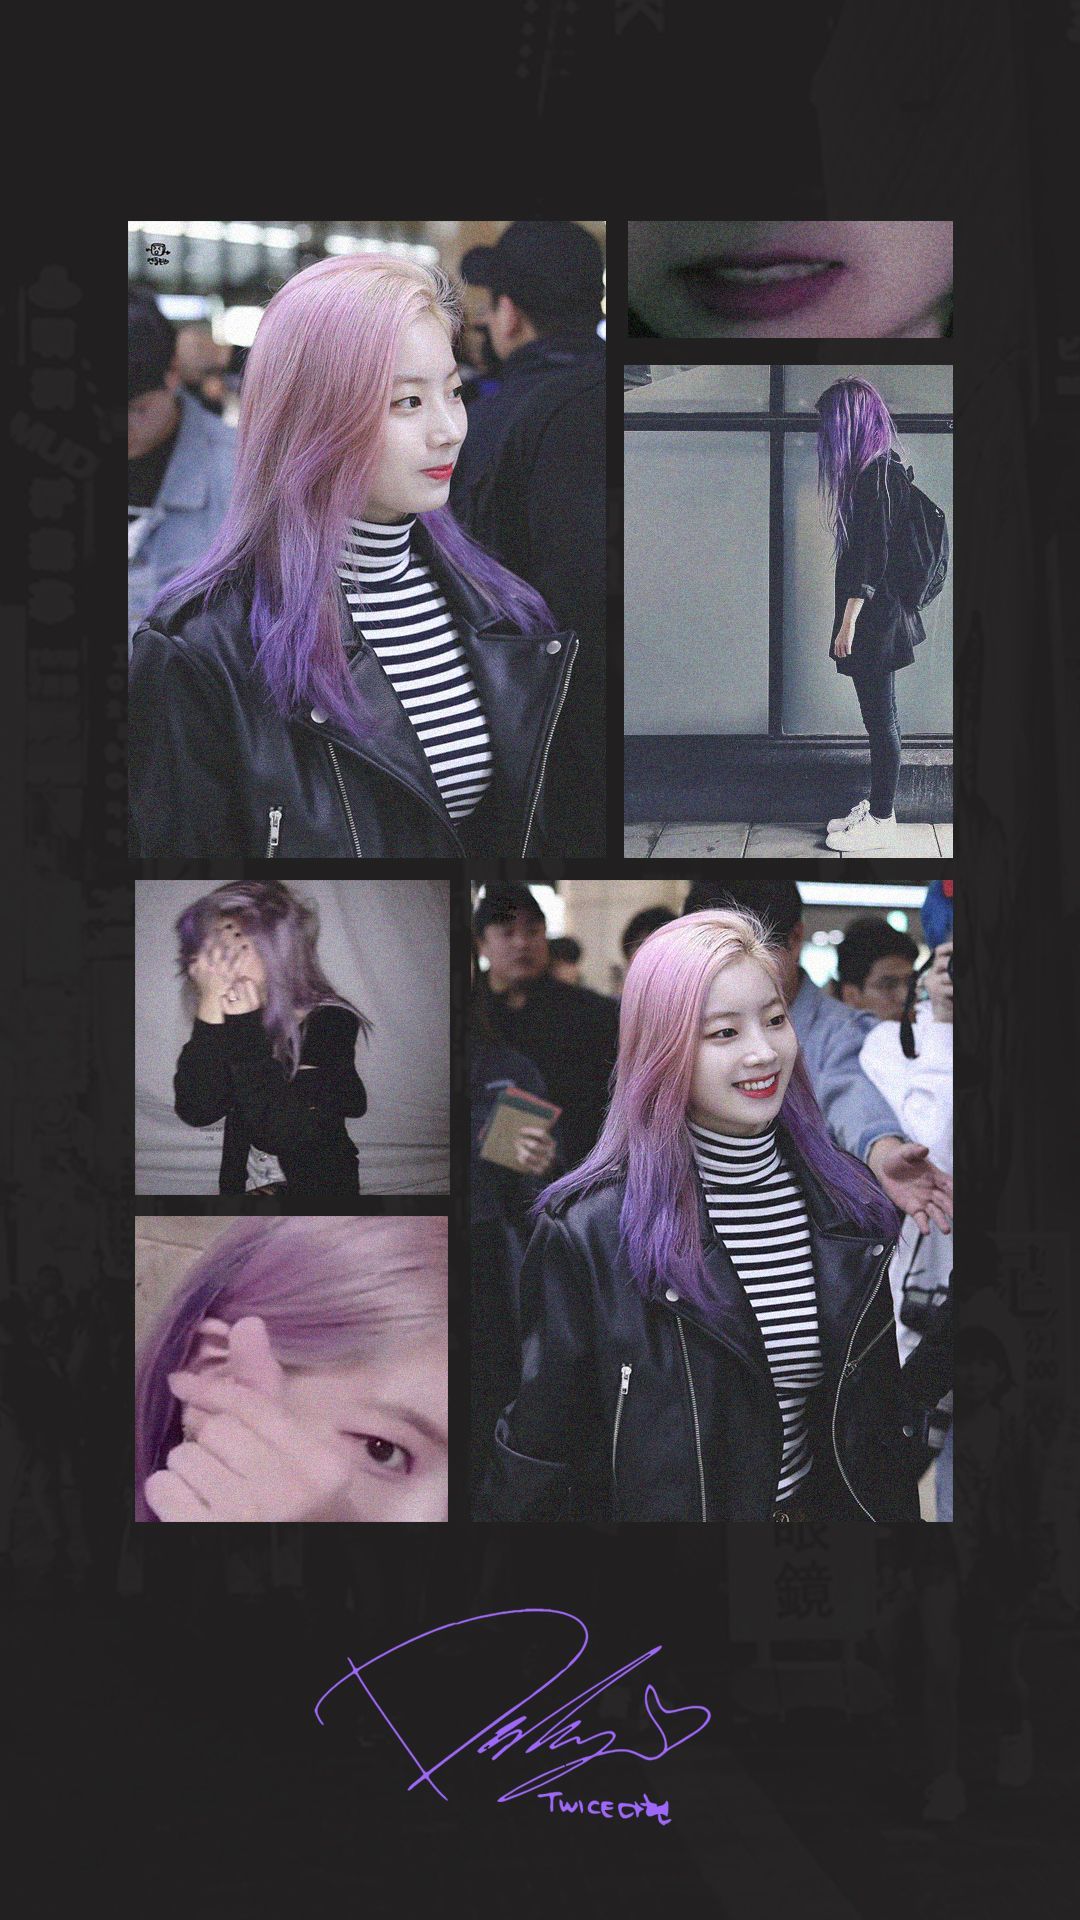 Dahyun in purple Aesthetic. I love this concept uwu! by yours truly #twice # aesthetic #twiceaeshetic #dahyun. Kpop wallpaper, Purple aesthetic, Kpop girl bands